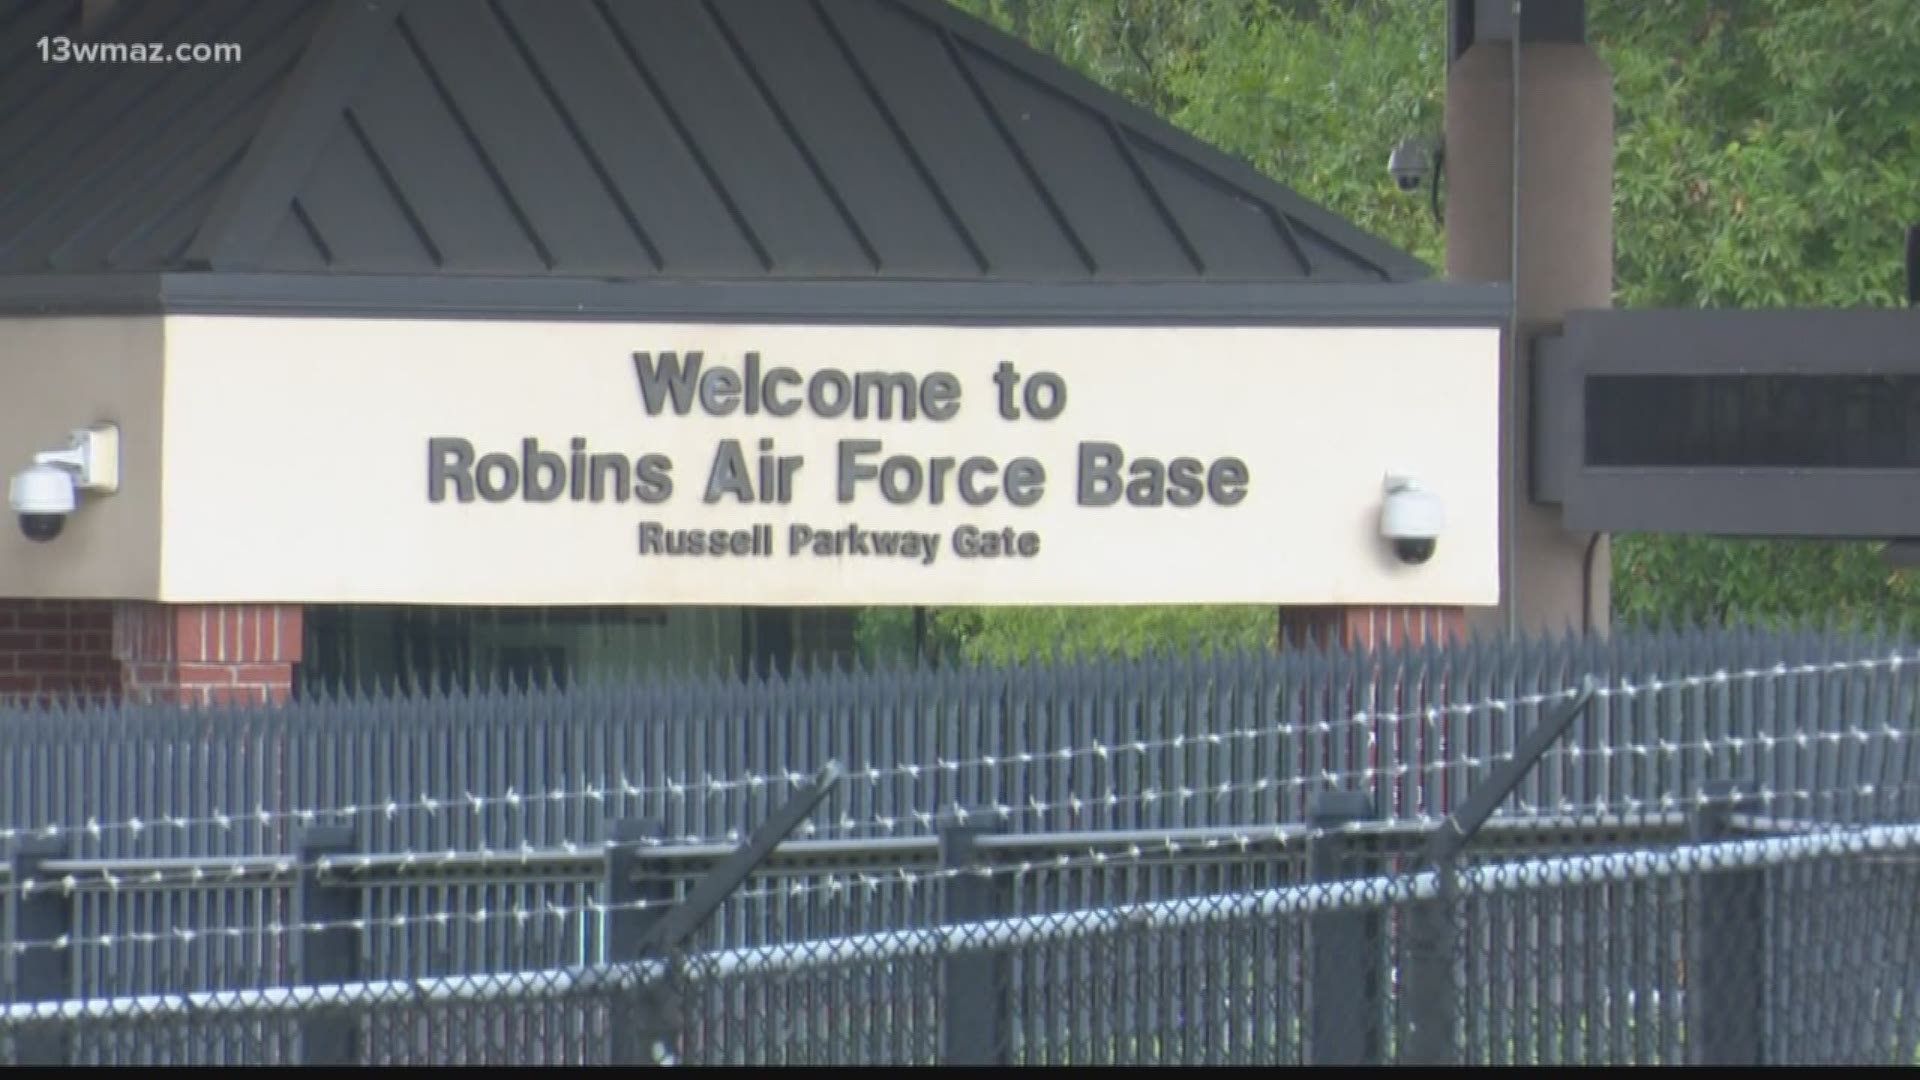 Robins Air Force Base confirmed its first COVID-19 case Saturday. 21st Century Partnership is talking about the steps the base is taking to stop the spread.